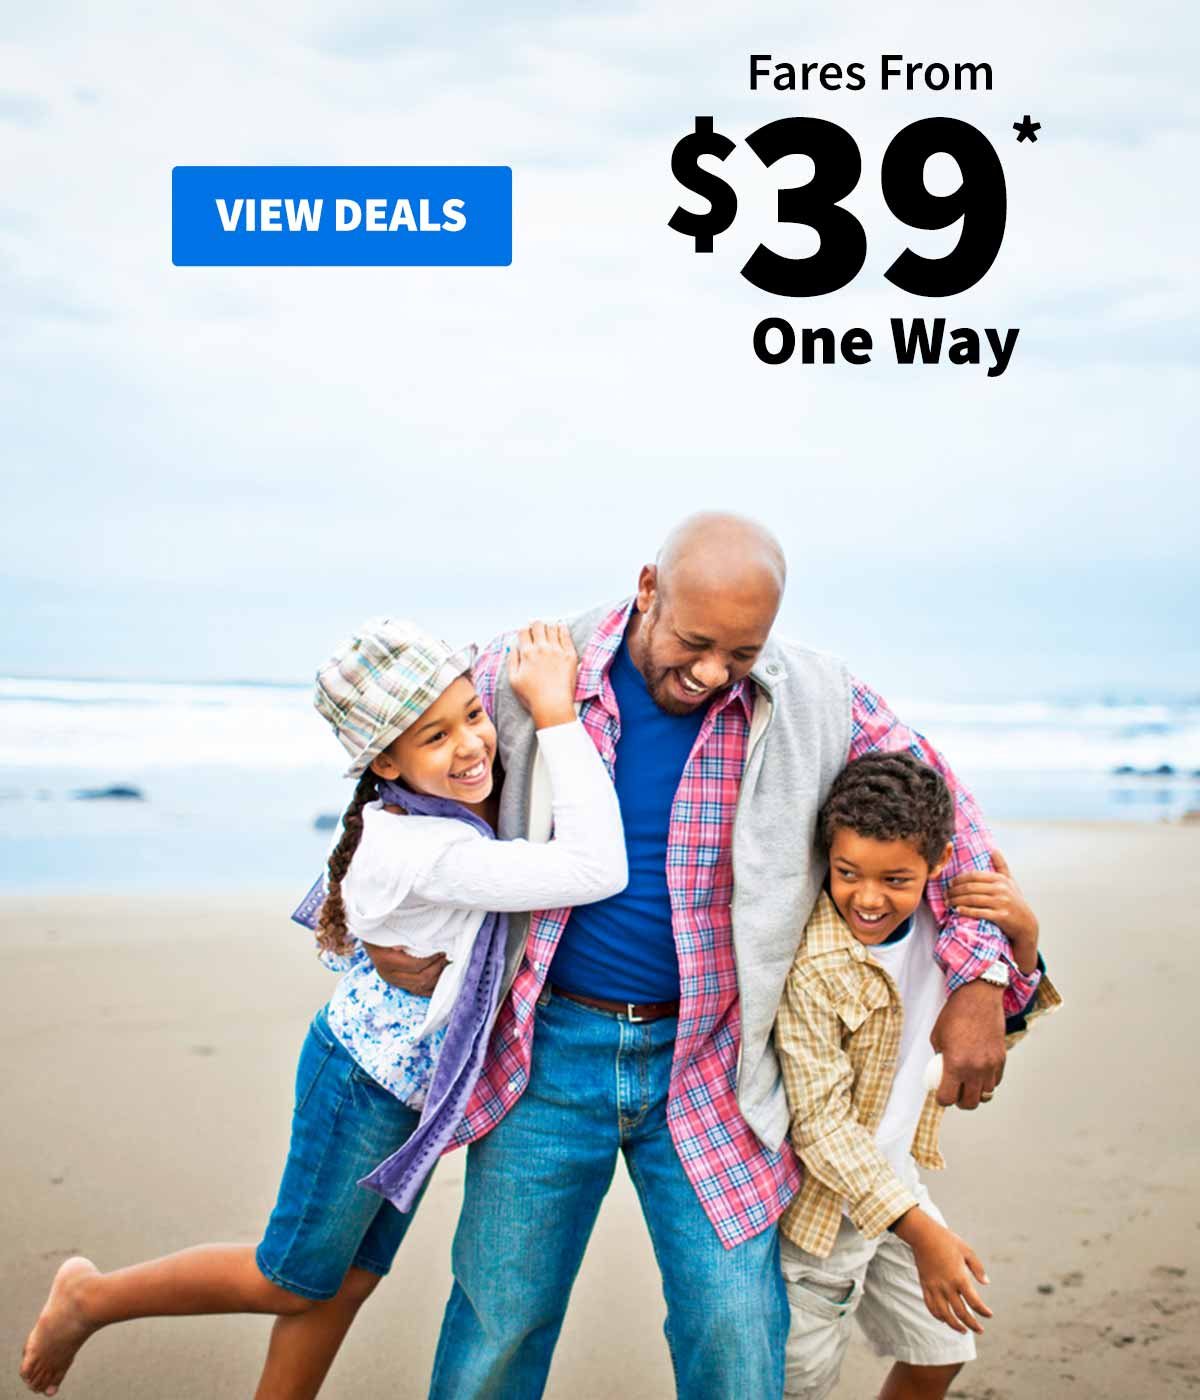 Fares From $39* One Way